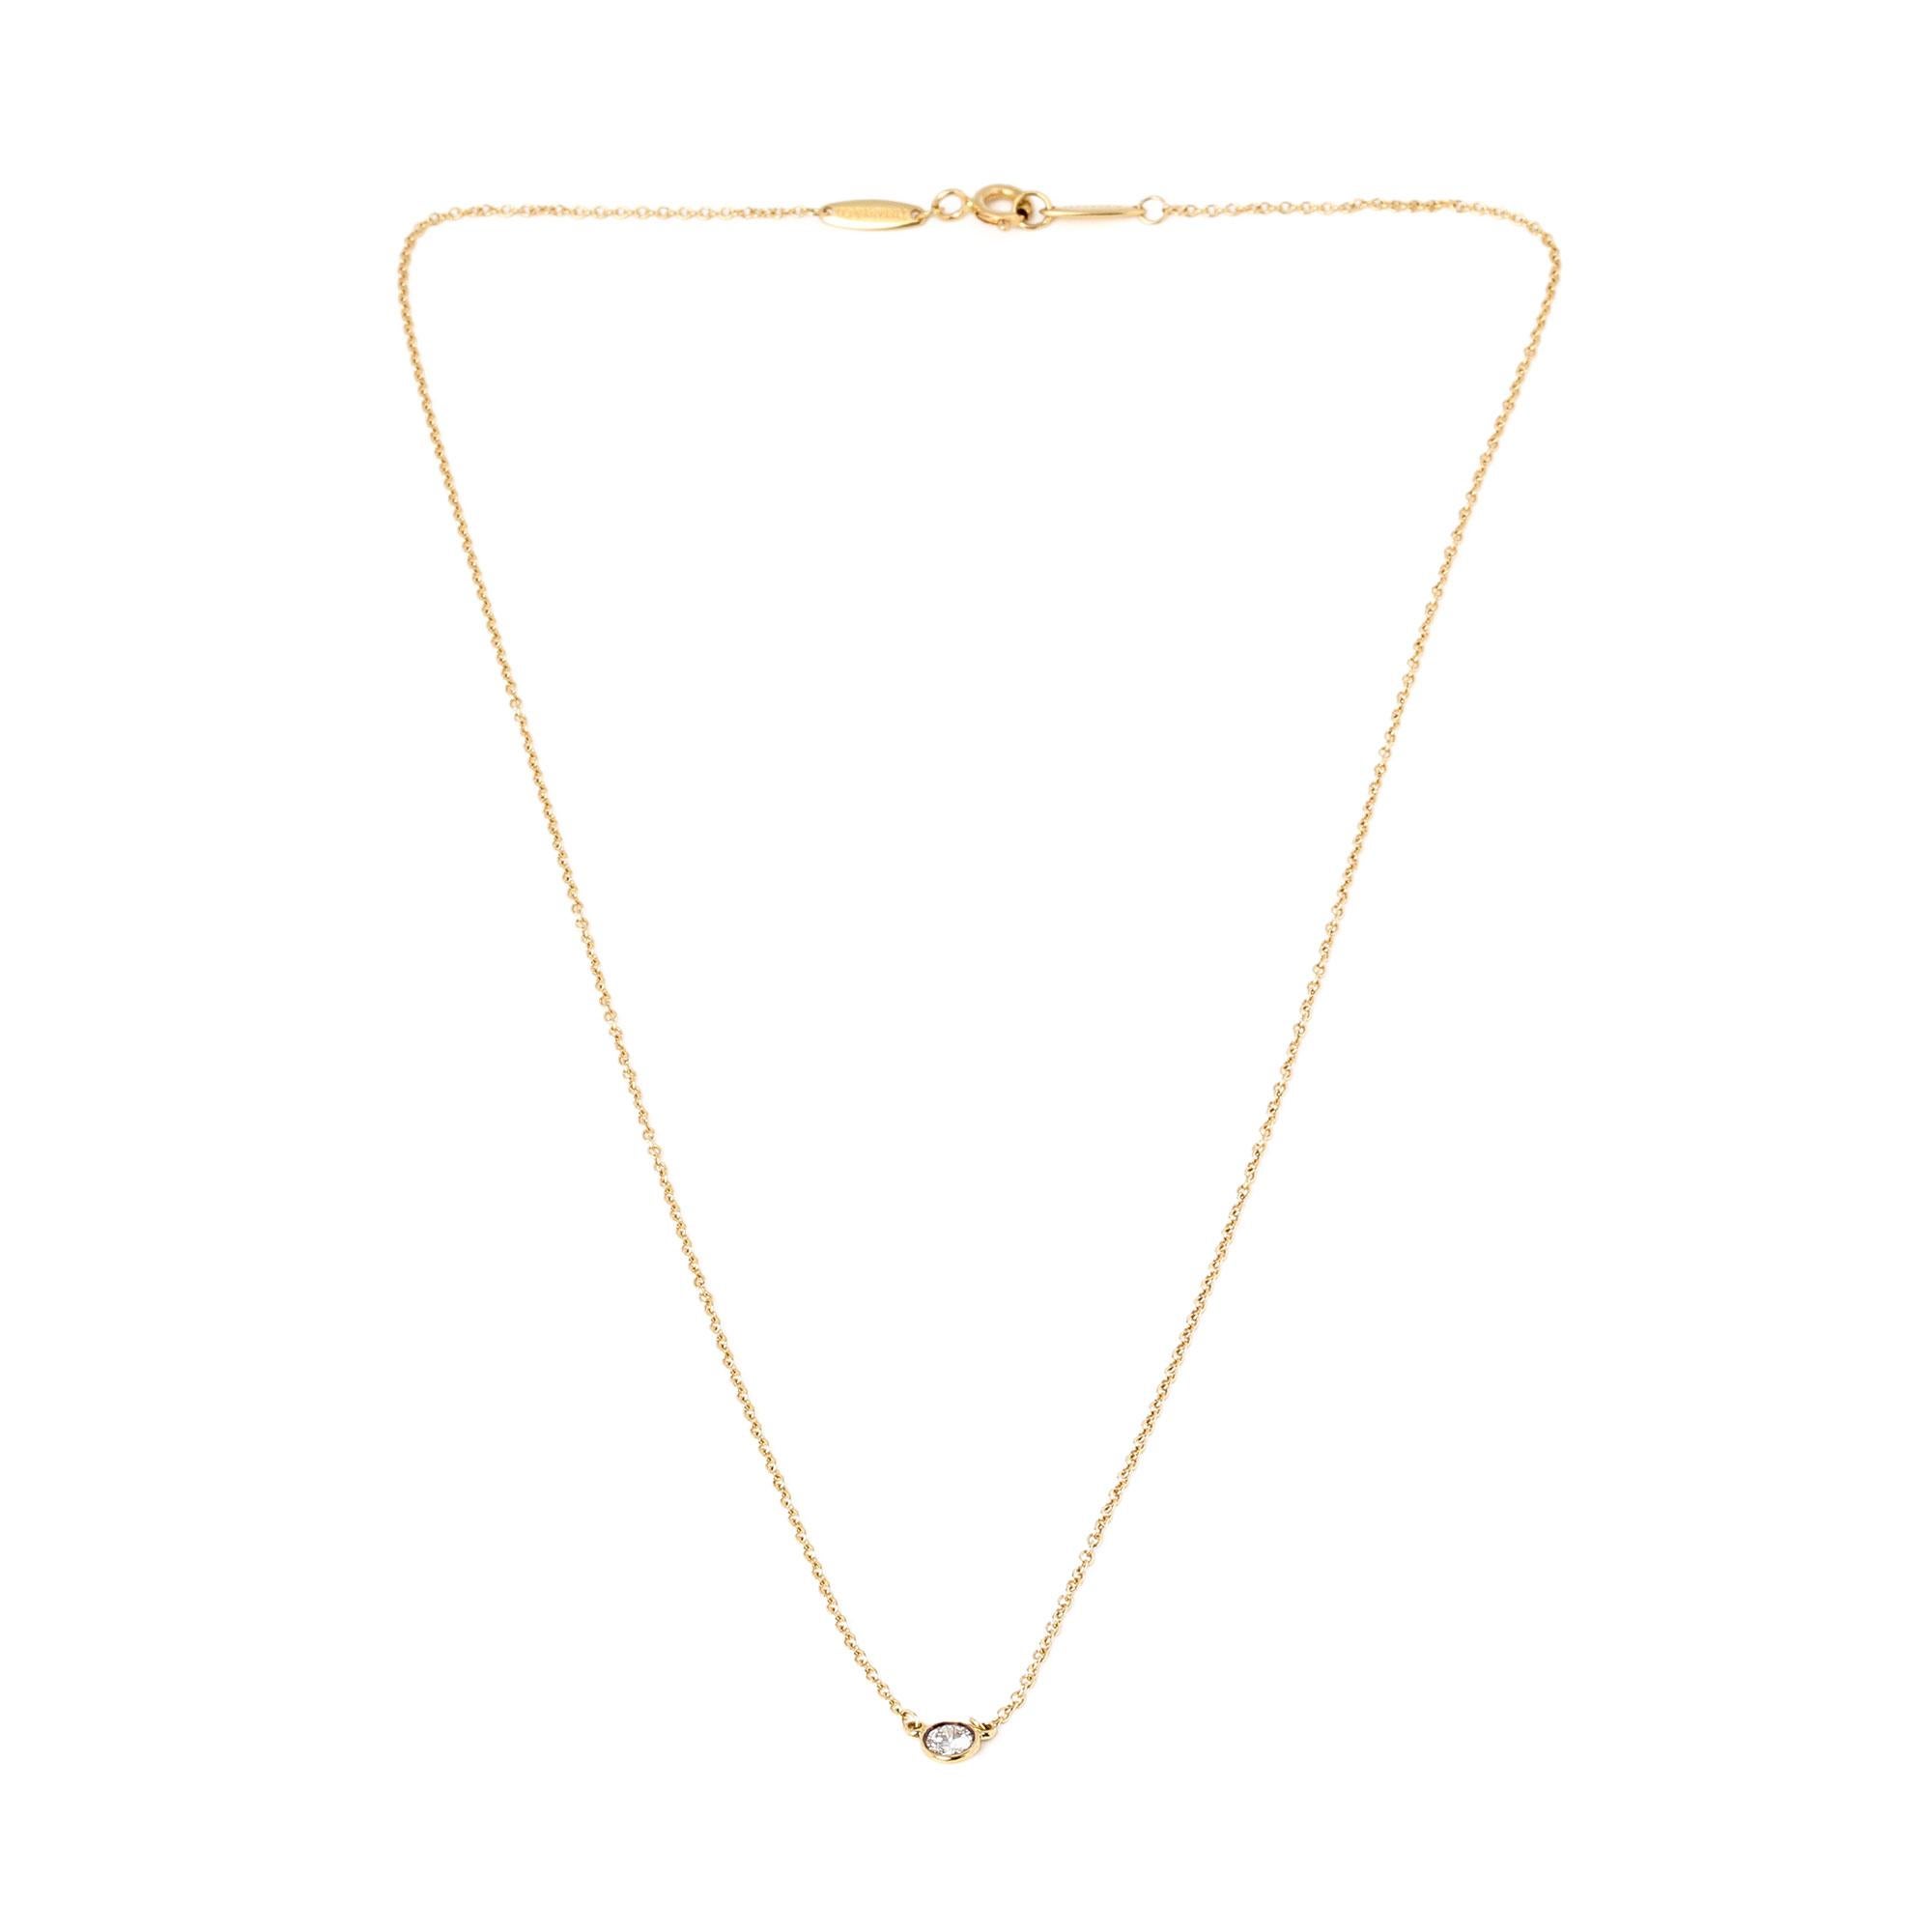 This pendant by Tiffany & Co is from the Elsa Peretti diamonds by the yard collection and features a solitaire round brilliant cut diamond mounted in 18ct yellow gold. Complete with Tiffany pouch and outer box. Our Xupes reference is J531 should you